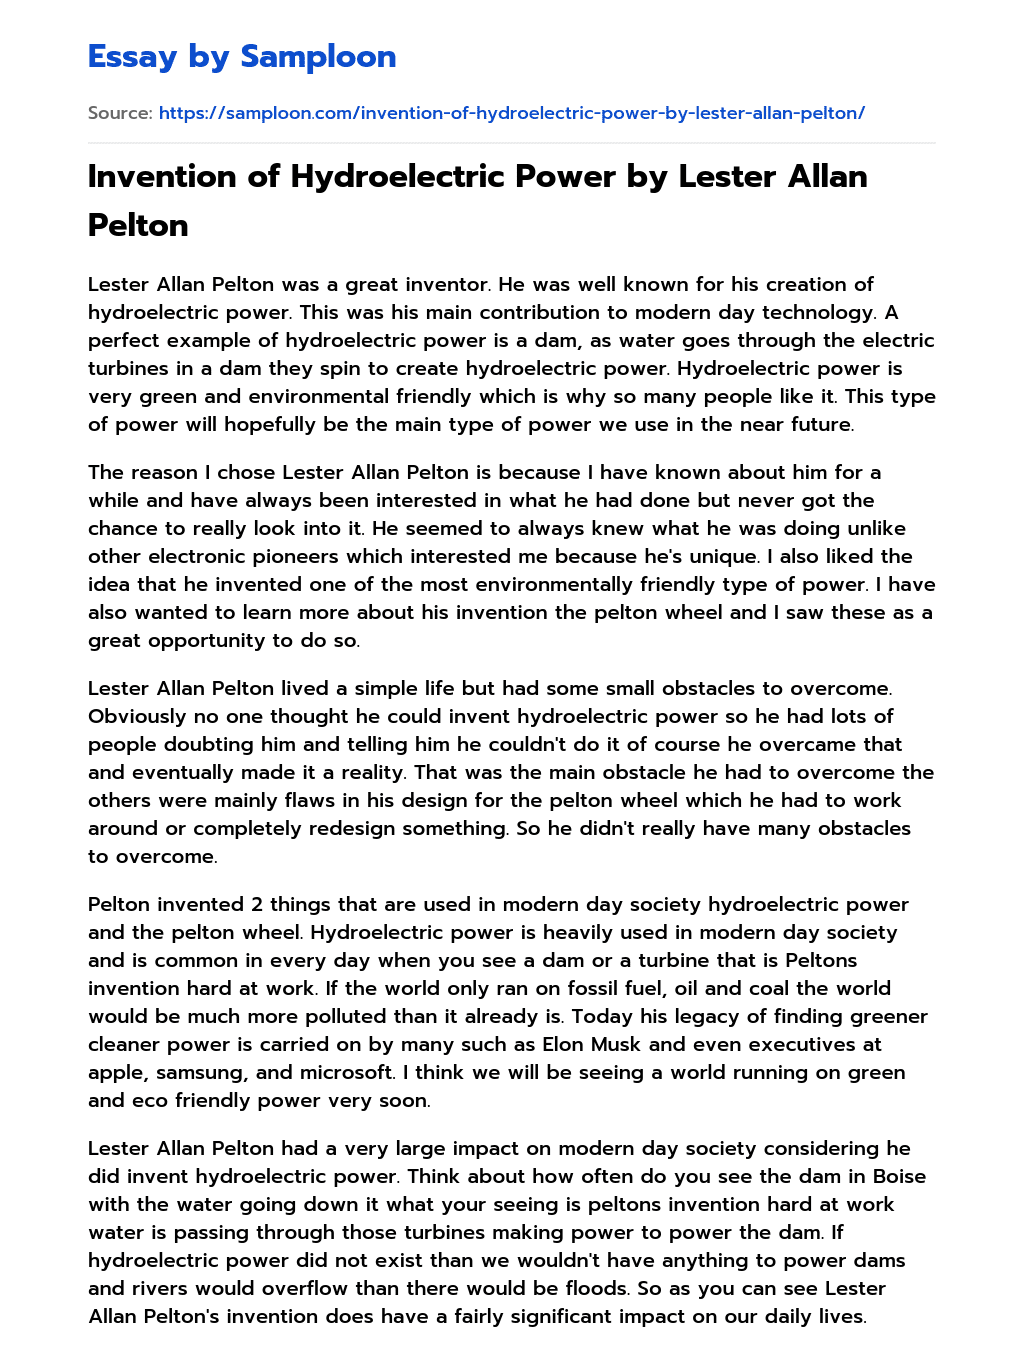 Invention of Hydroelectric Power by Lester Allan Pelton essay